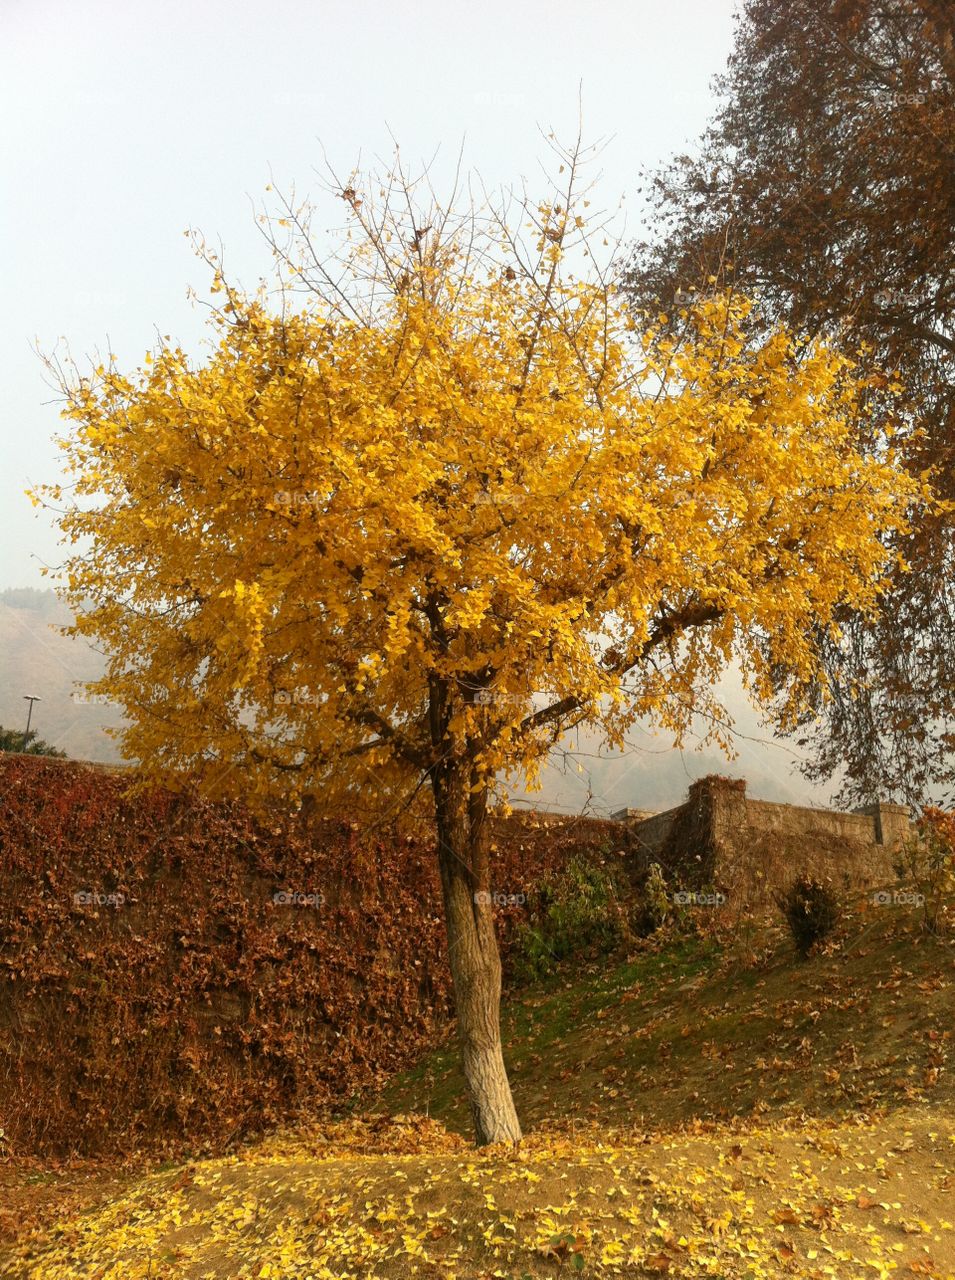 Ginko-Biloba tree in full bloom at the foothills of the Himalayas